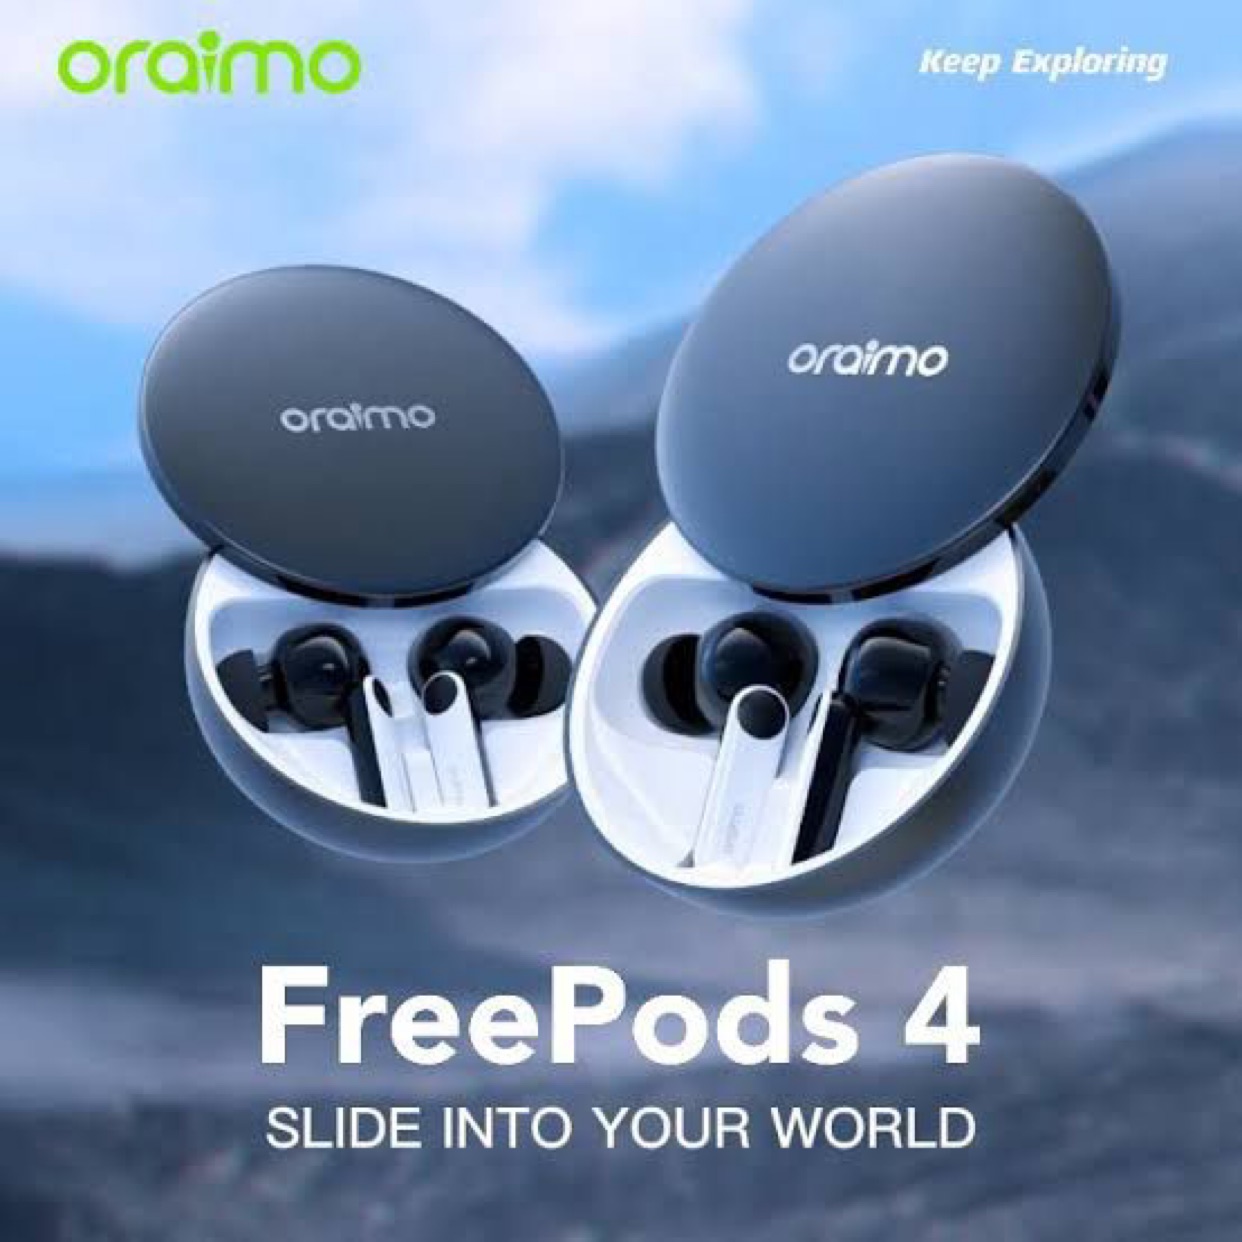 NEW oraimo FreePods 4 REVIEW